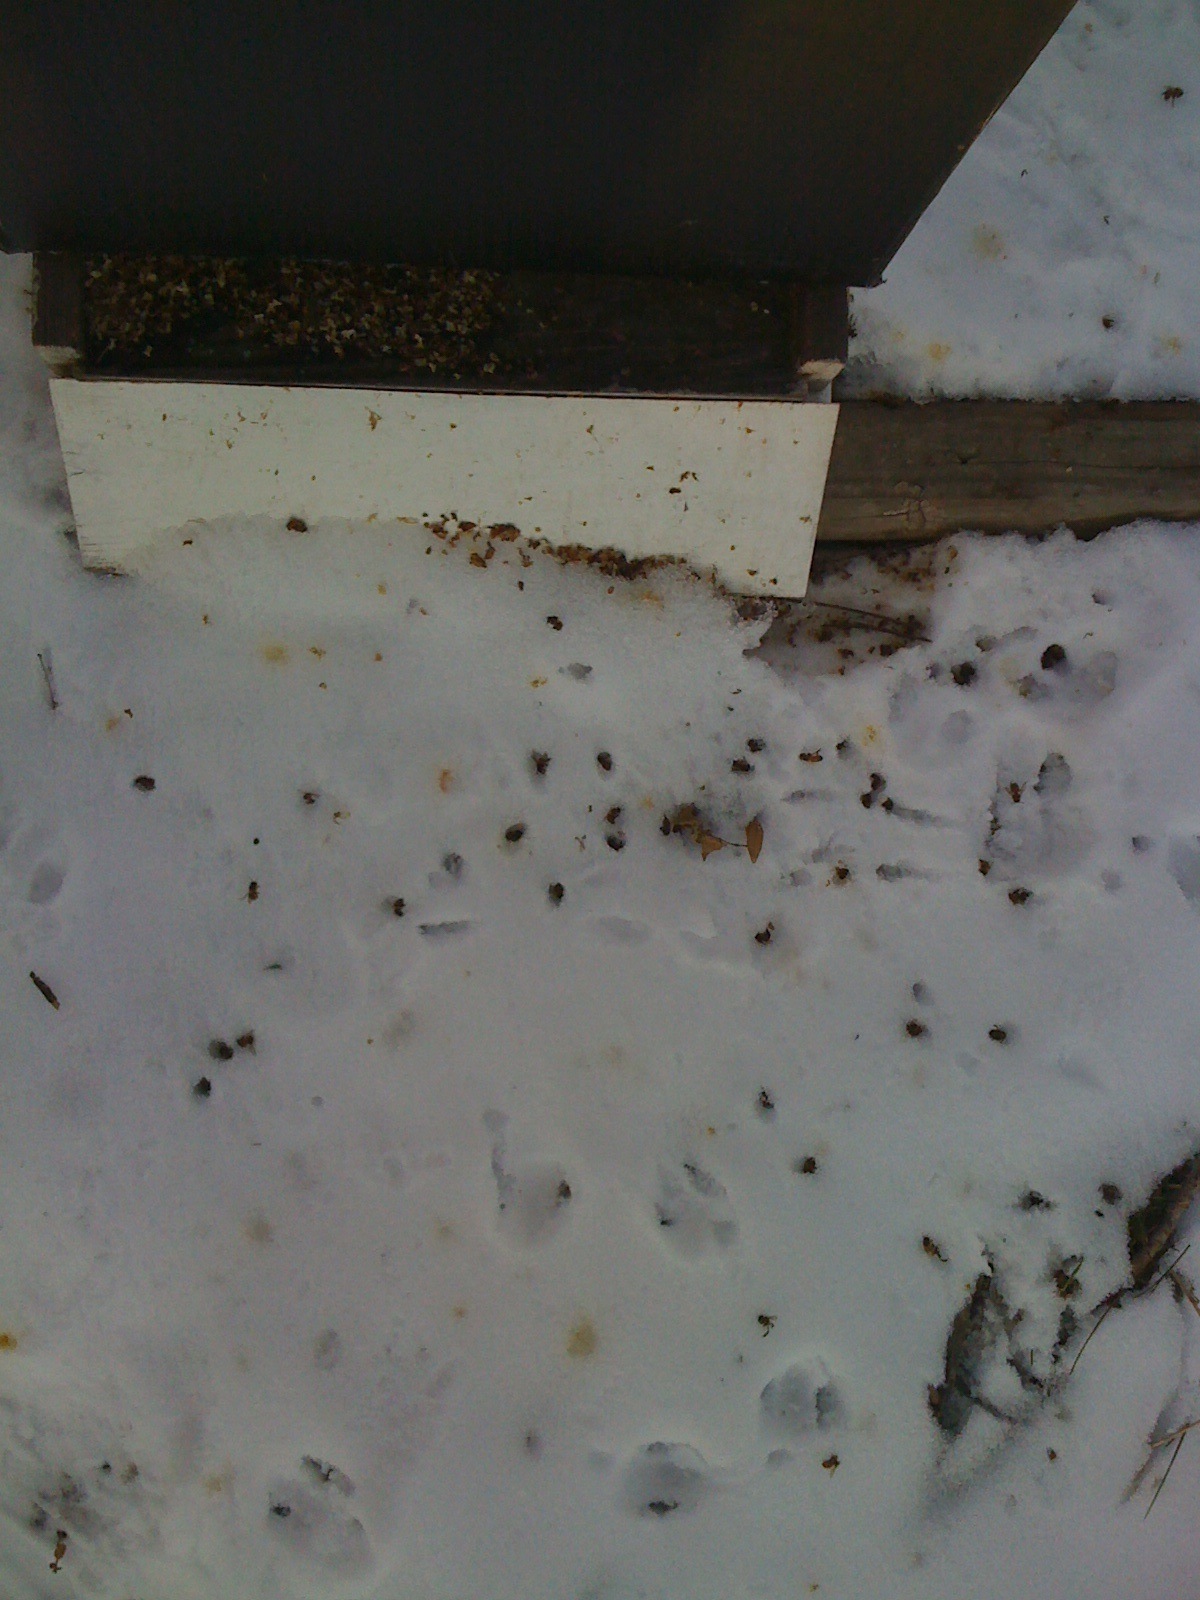 Dead bees in snow